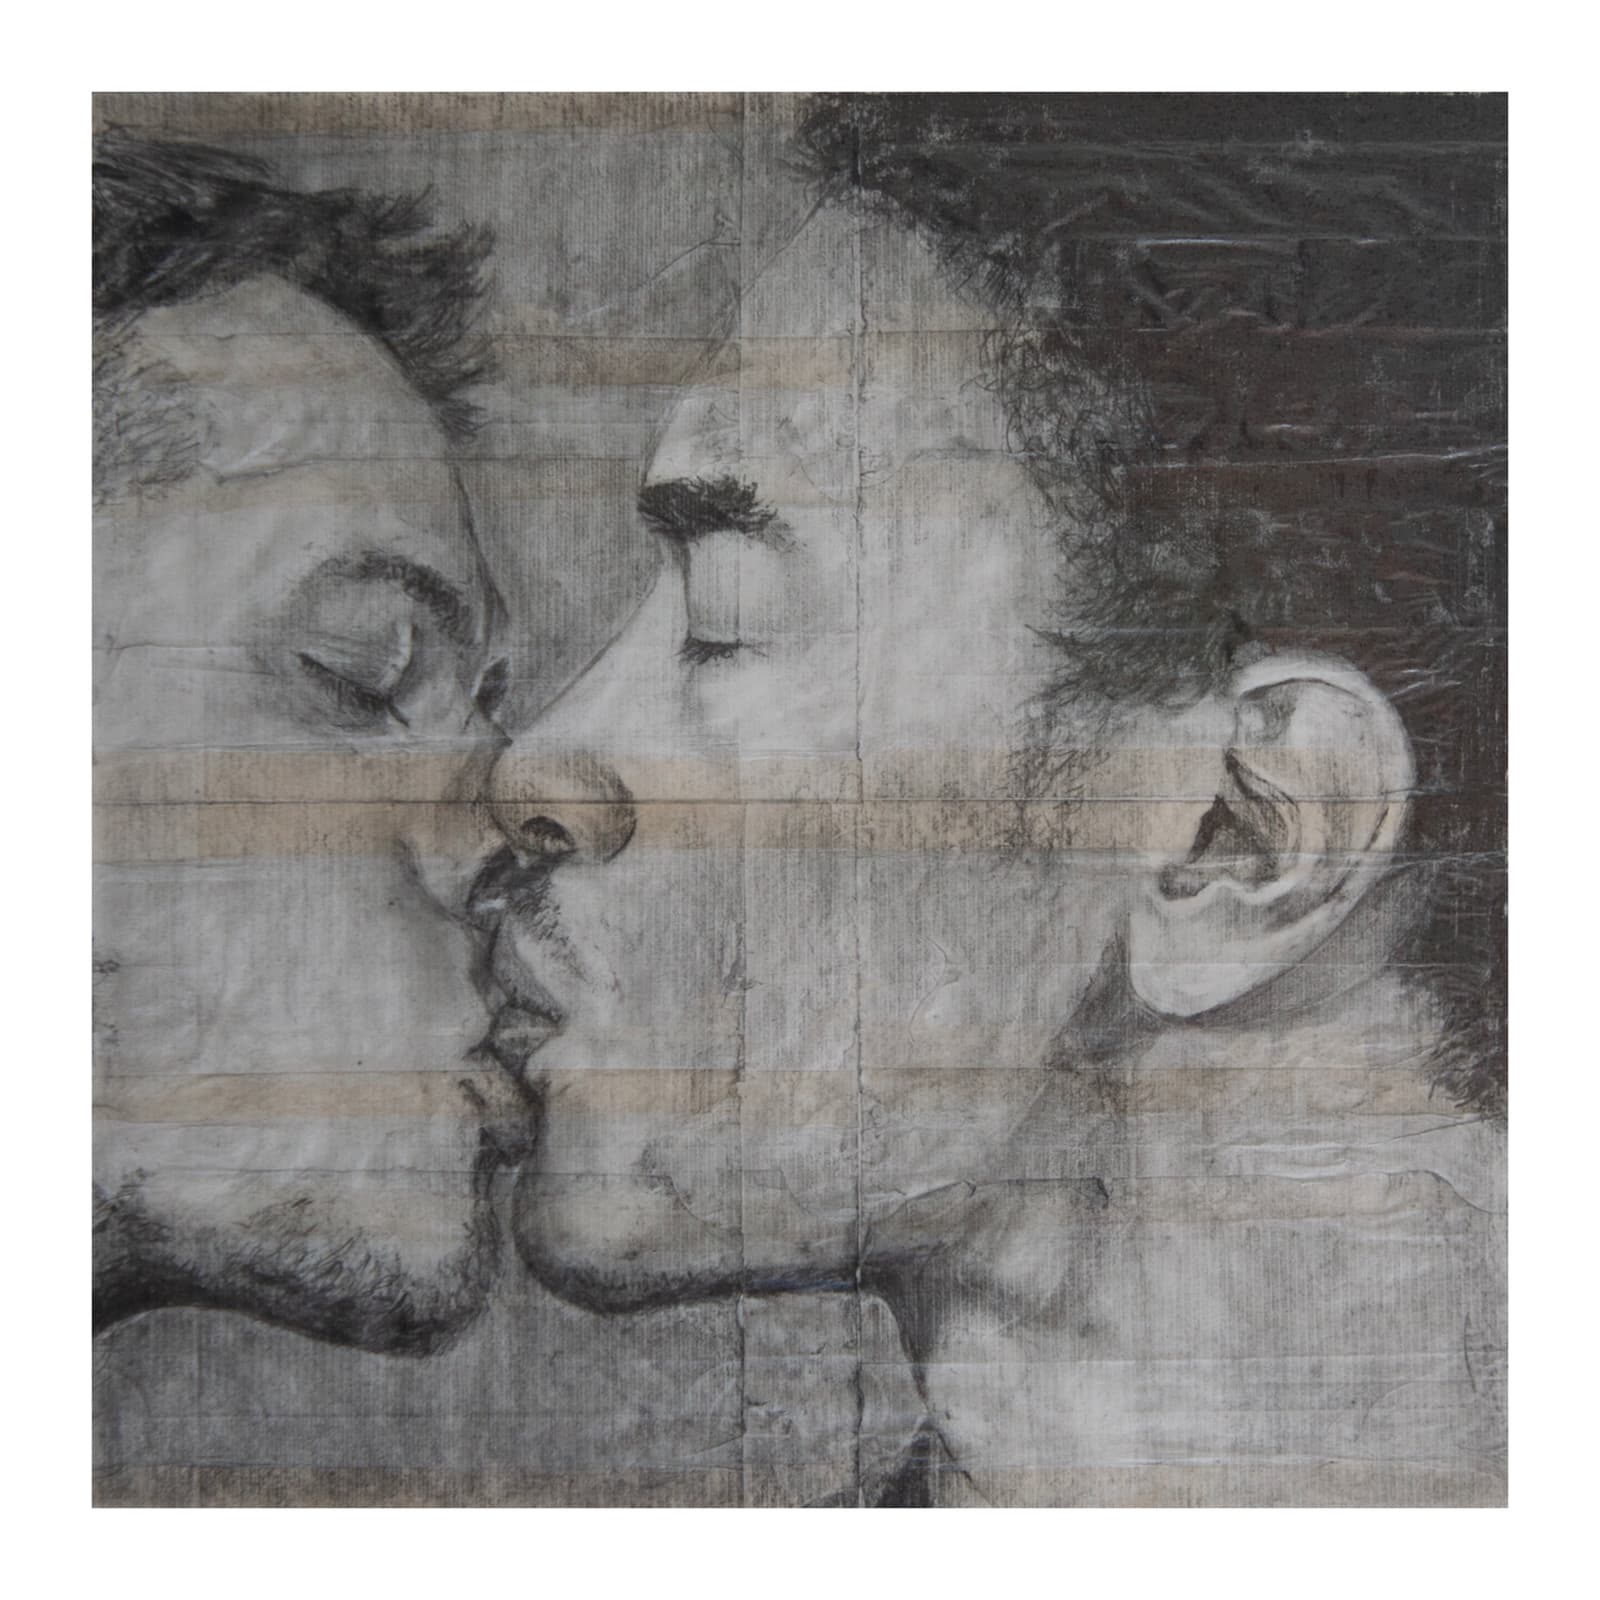 There is never more than a fag paper between them- Nathan and Jeremiah- Pencil Artwork on Fag Paper